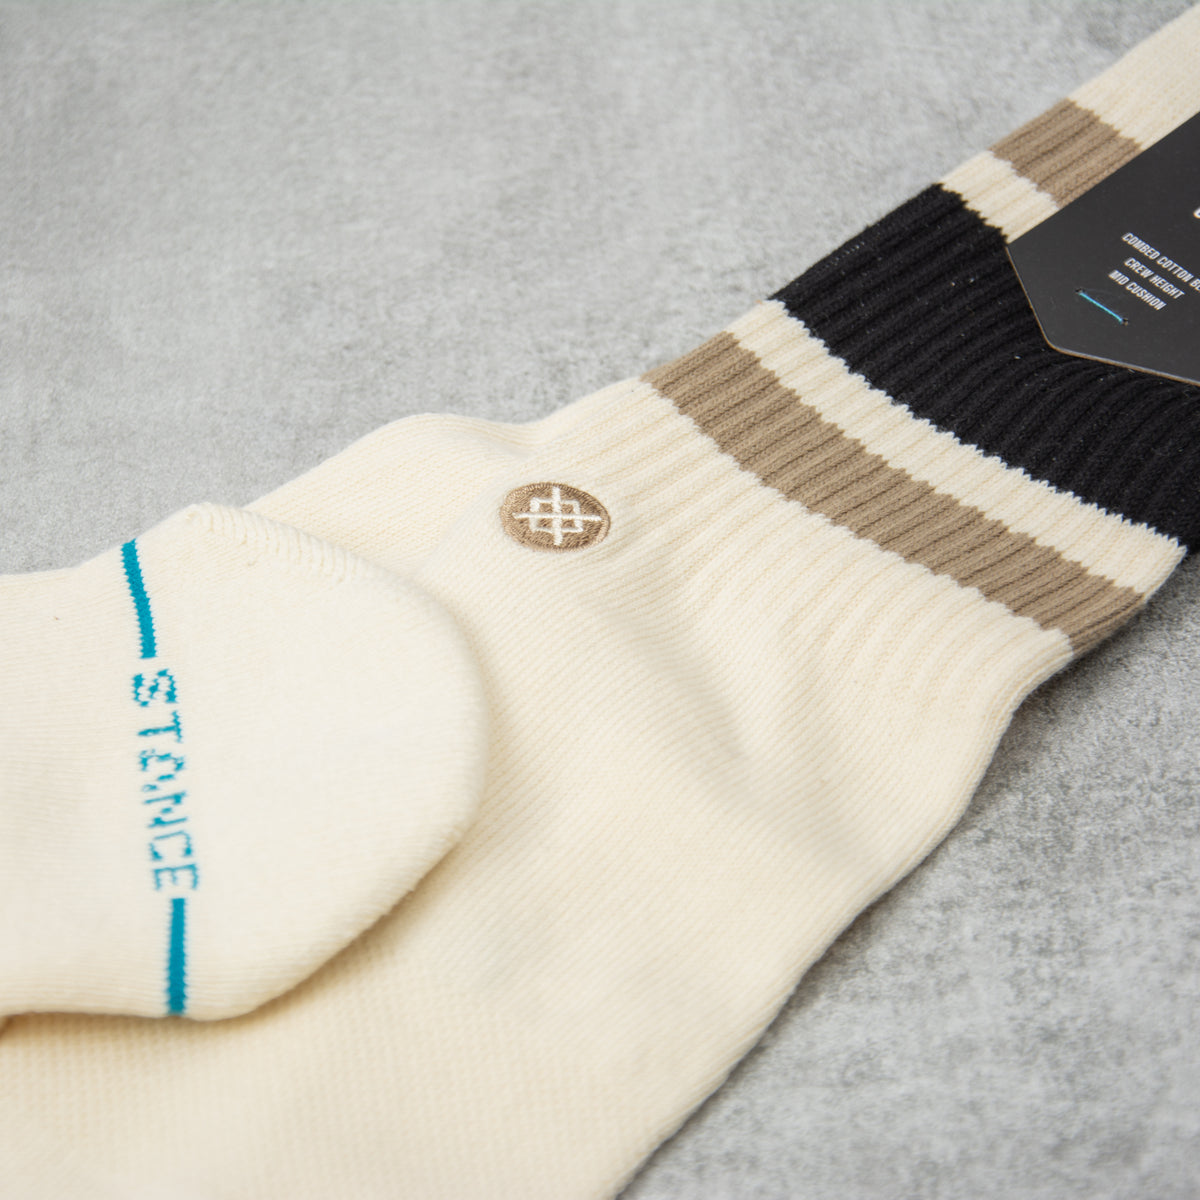 Buy Stance Socks Boyd ST - Taupe@Union Clothing, trusted since 1987 ...